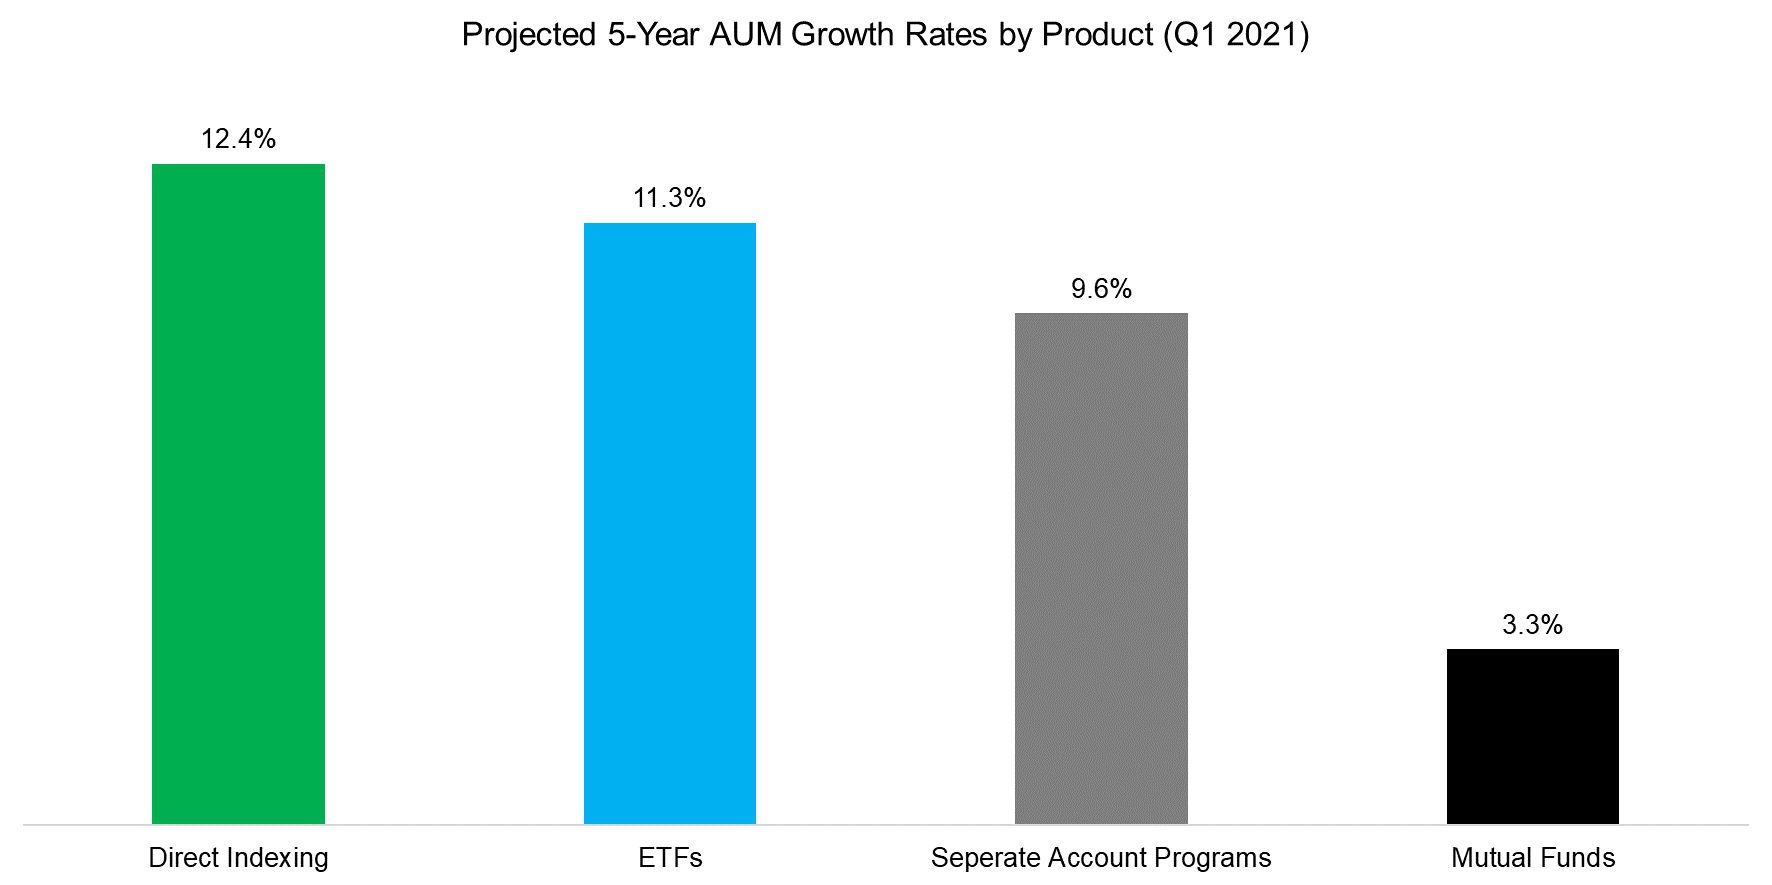 Projected 5-Year AUM Growth Rates by Product (Q1 2021)